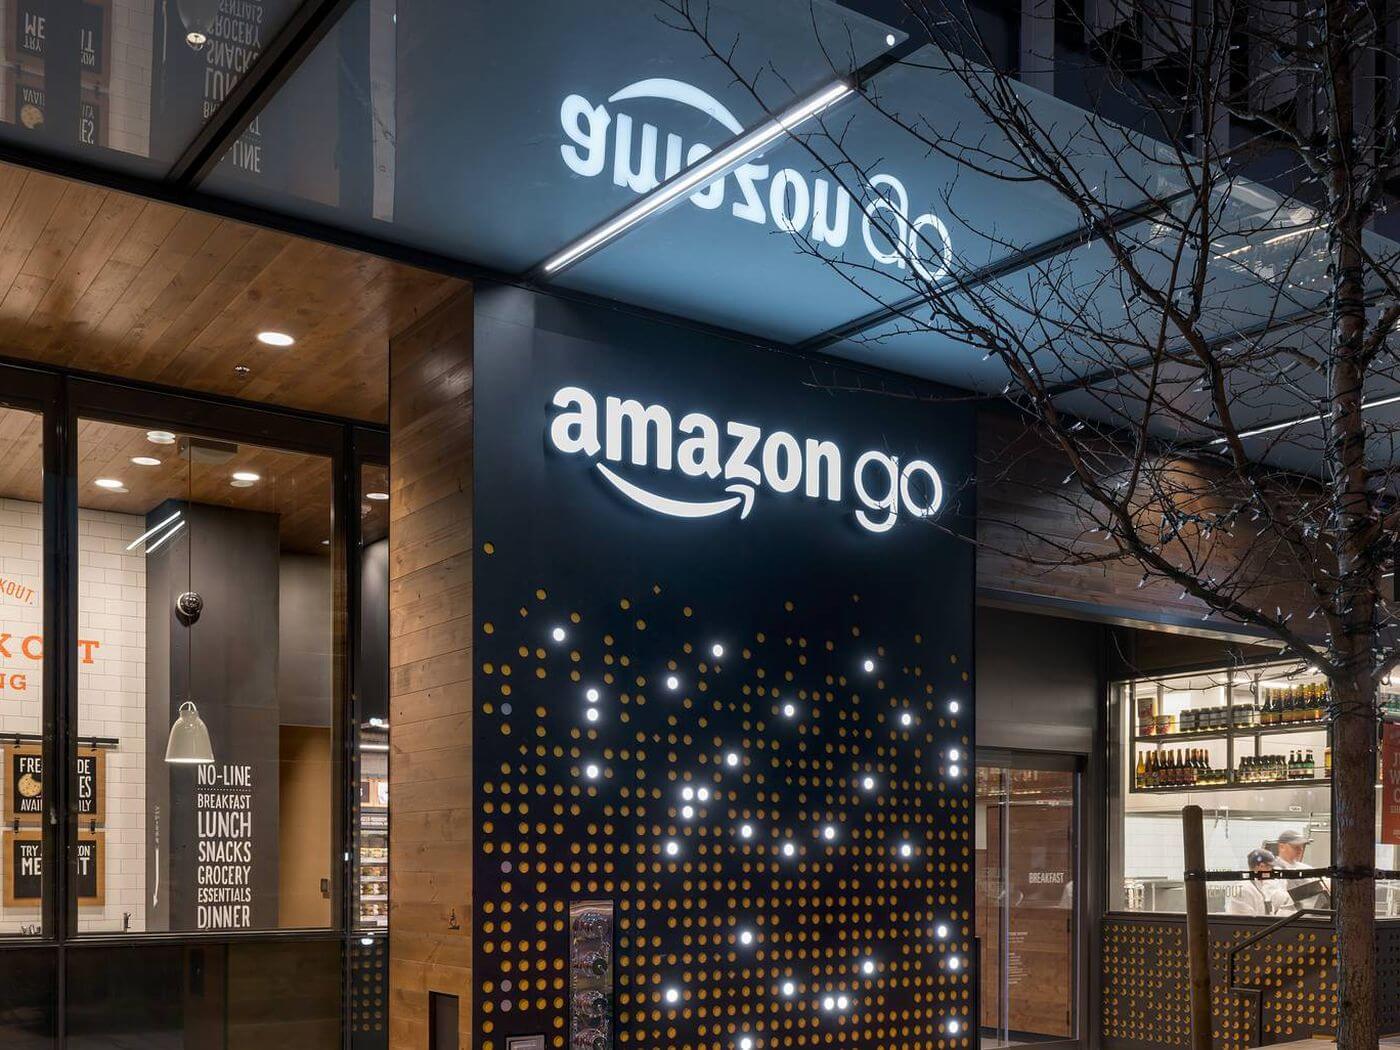 Amazon to open 3,000 brick-and-mortar stores by 2021